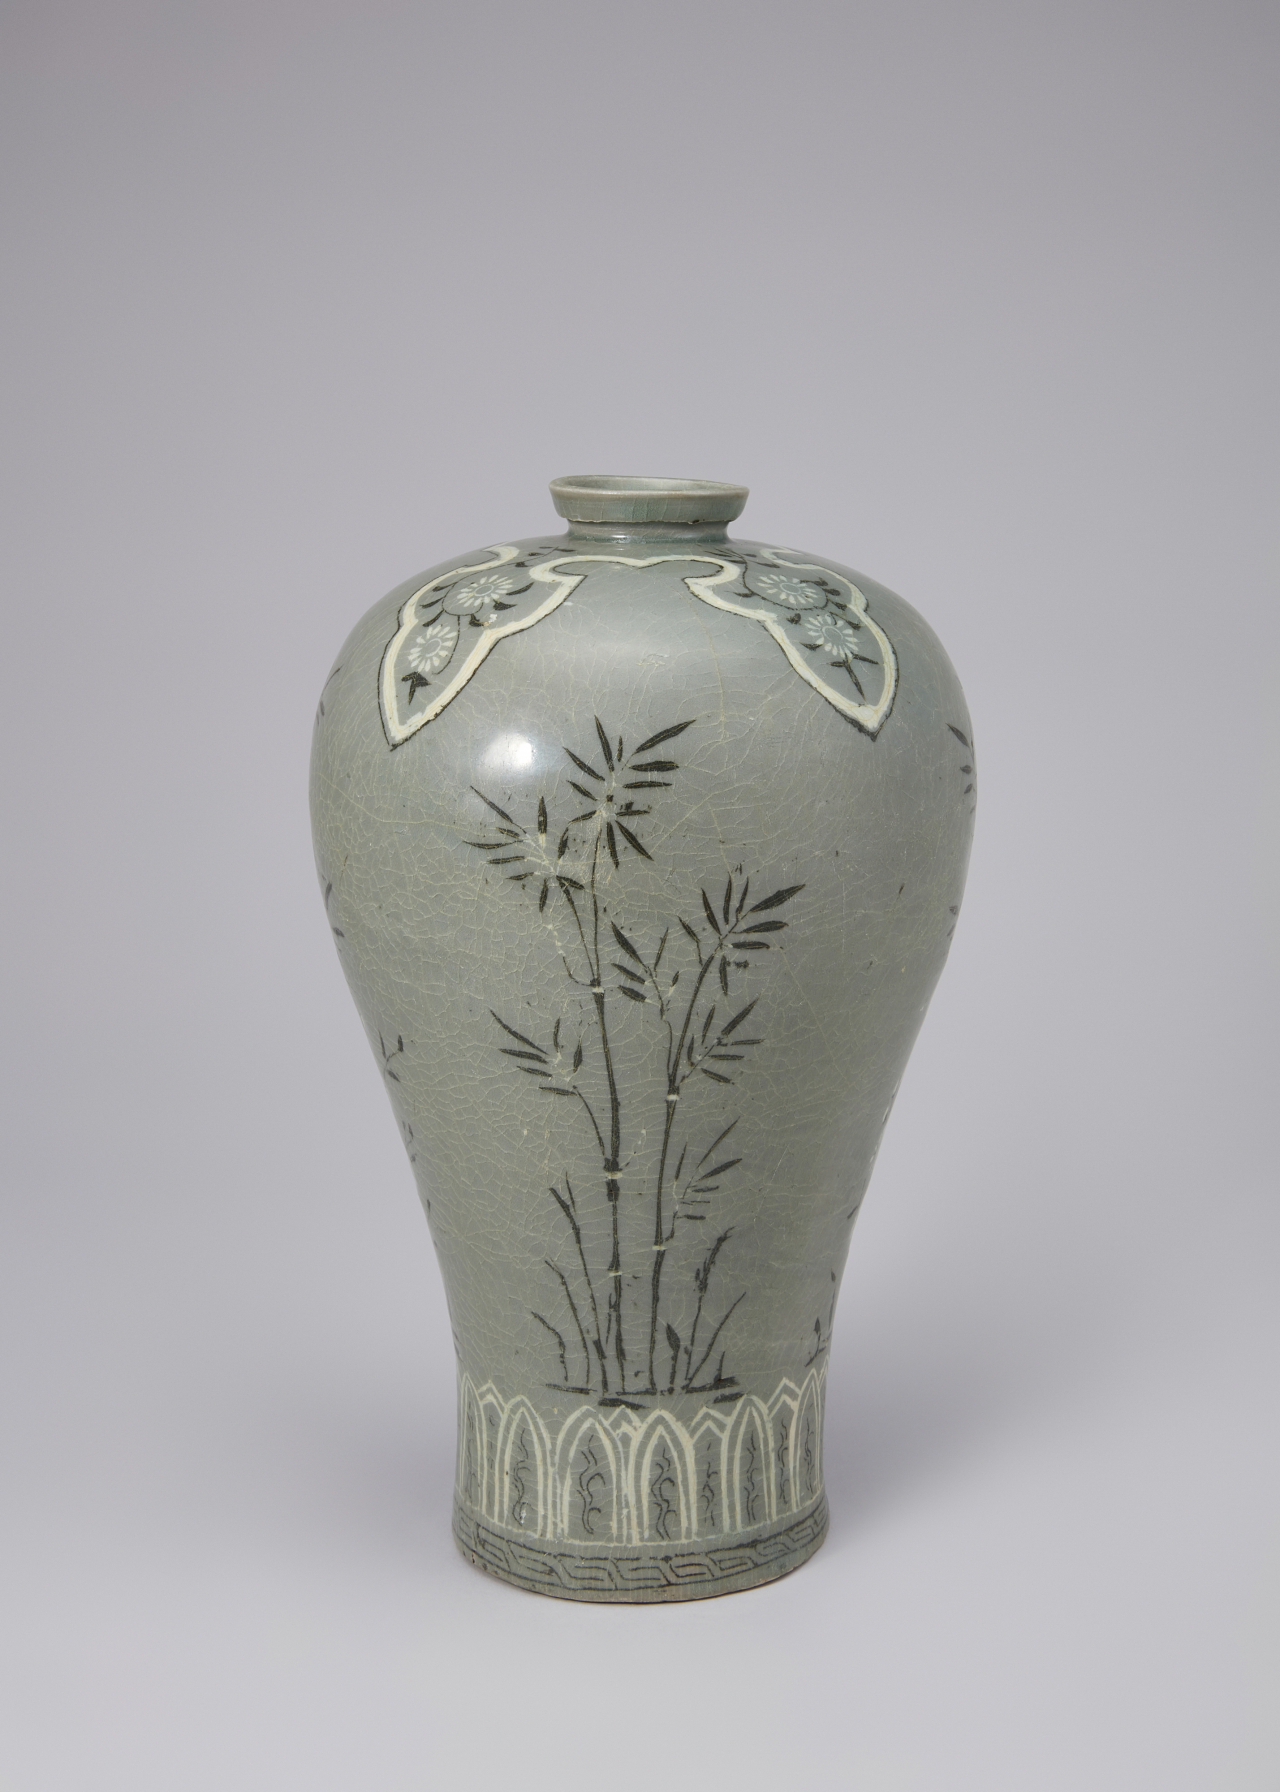 Celadon prunus vase with chrysanthemum and bamboo design from the 13th century (NMK)